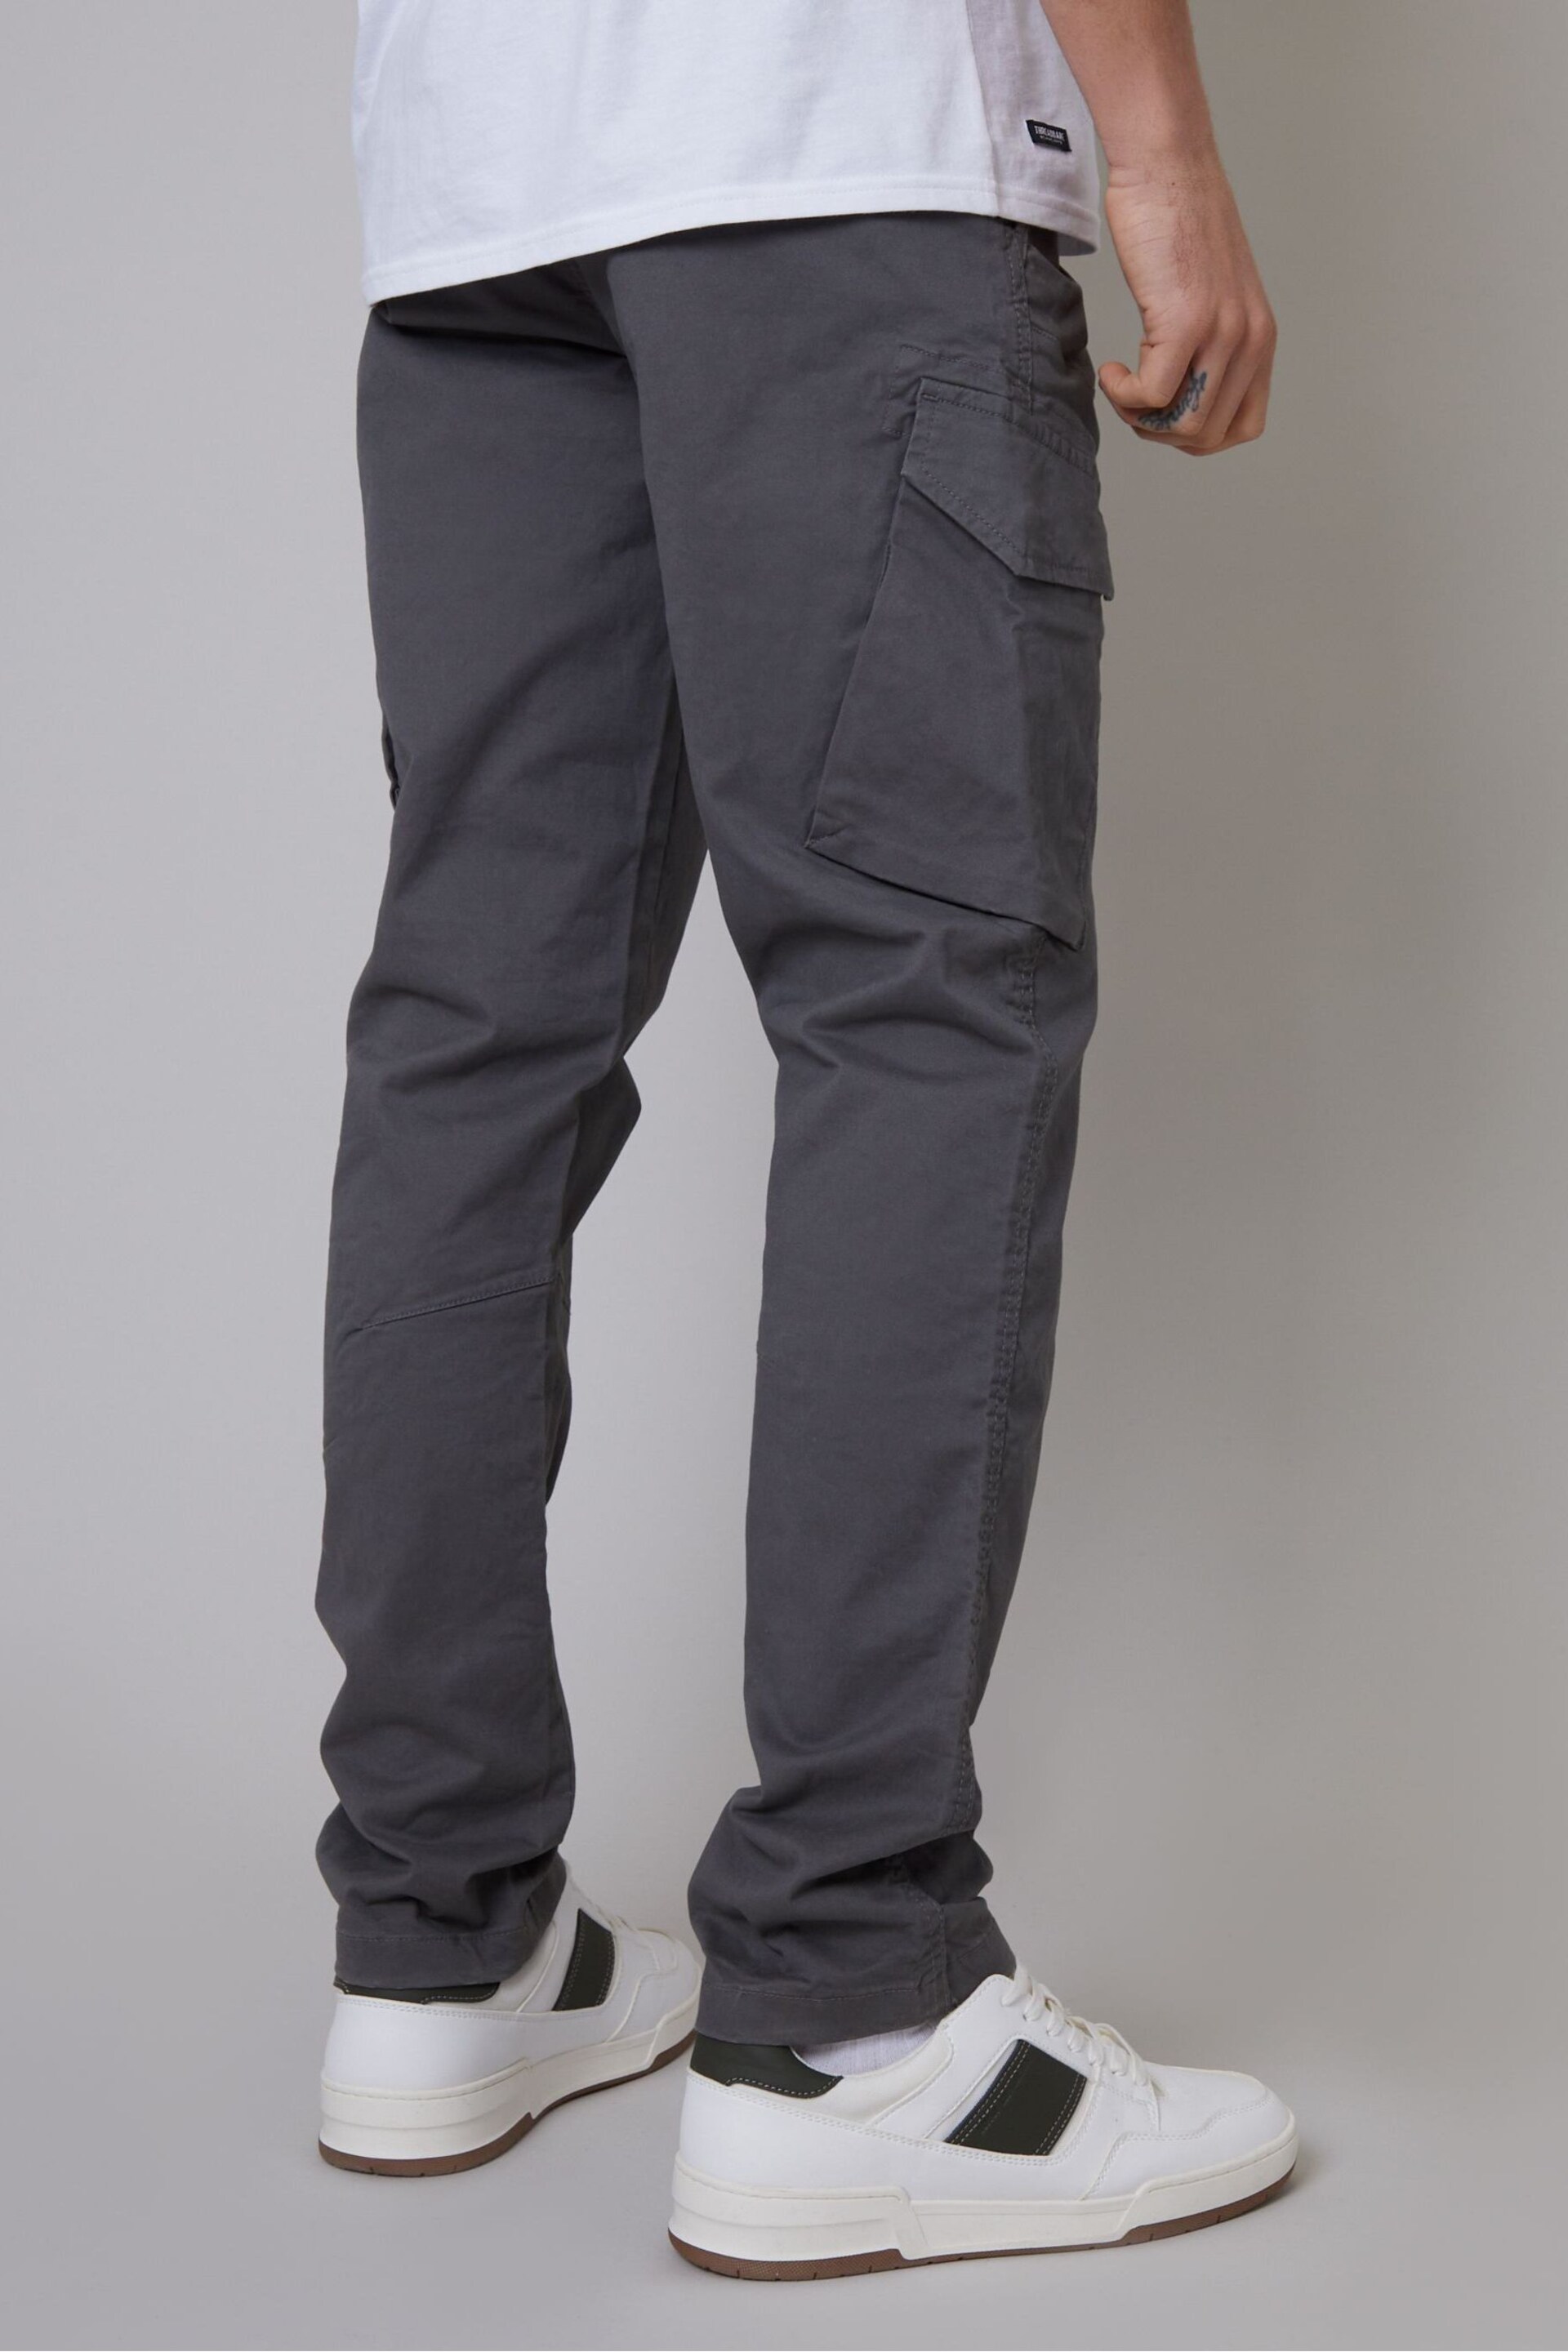 Threadbare Grey Cotton Cargo Trousers With Stretch - Image 2 of 4